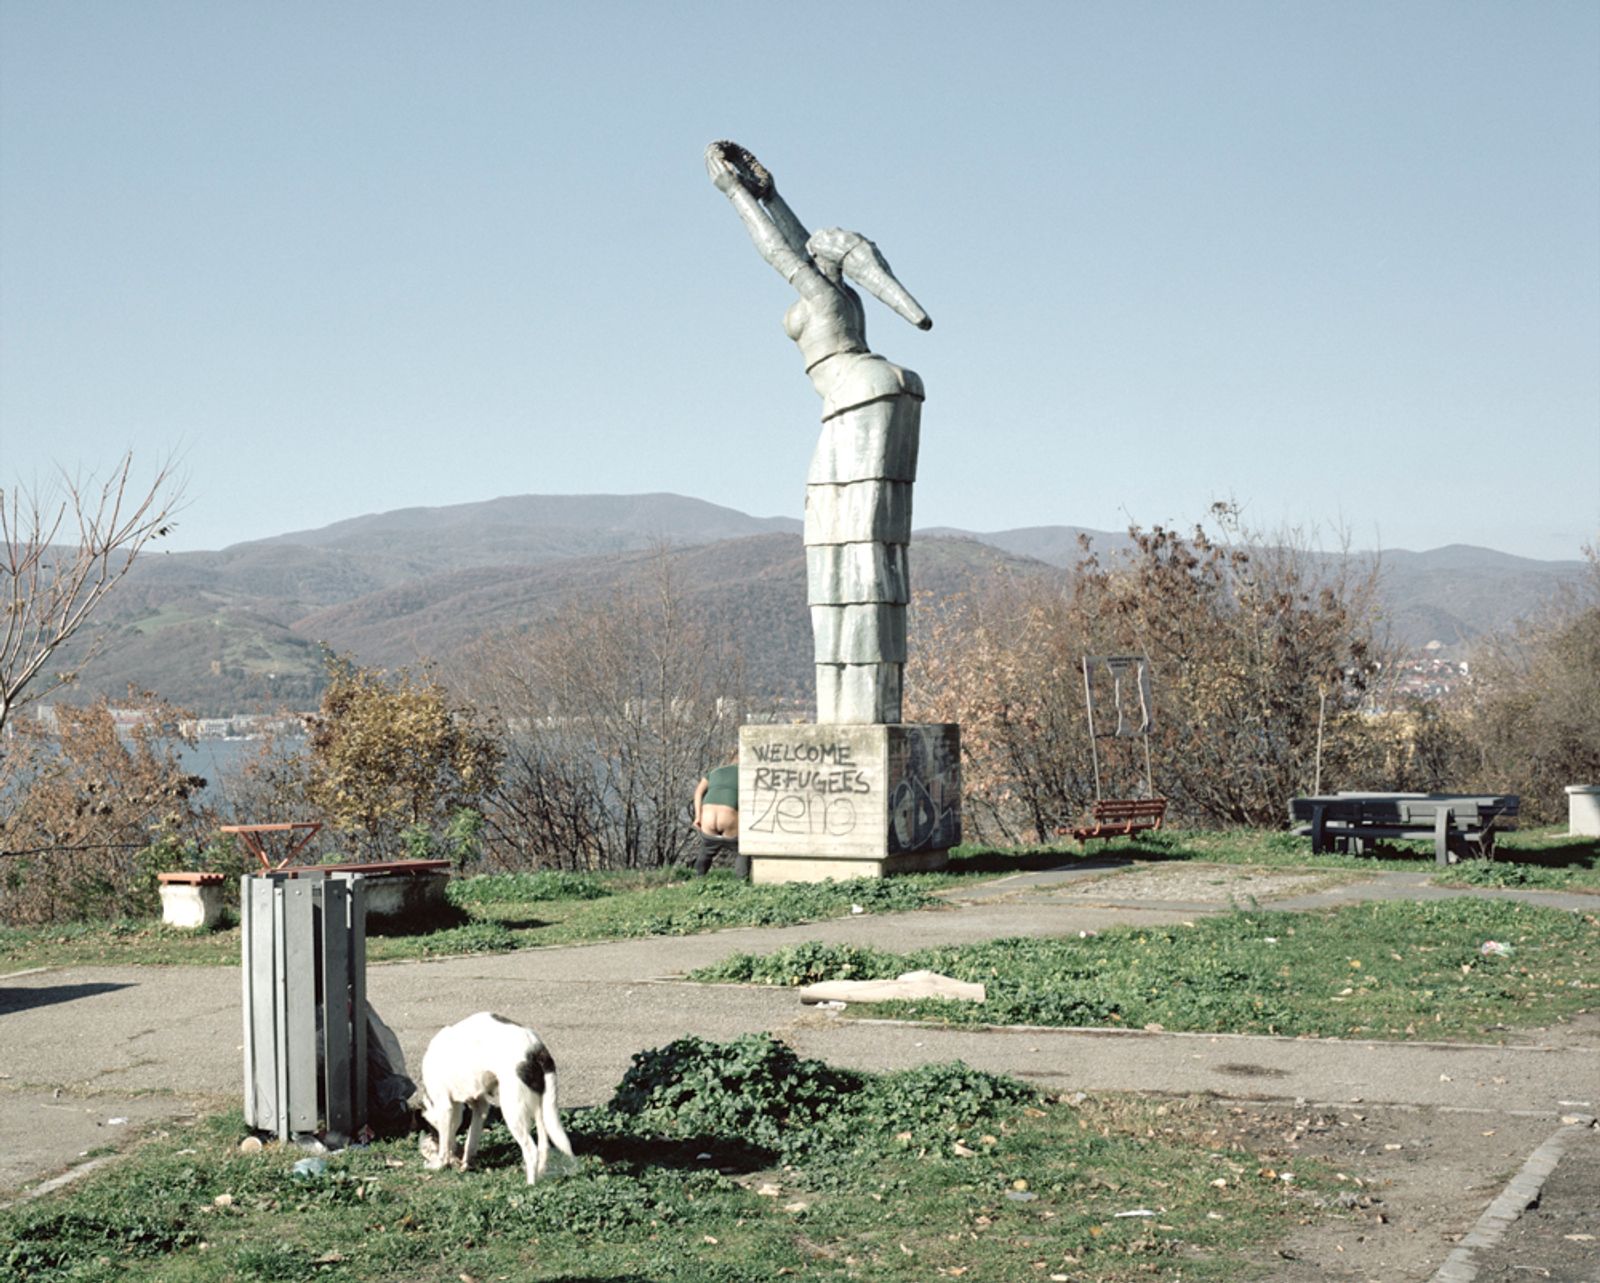 © Tommaso Rada - Romania, Orsova. A communist style monument with a wrote welcoming refugees.